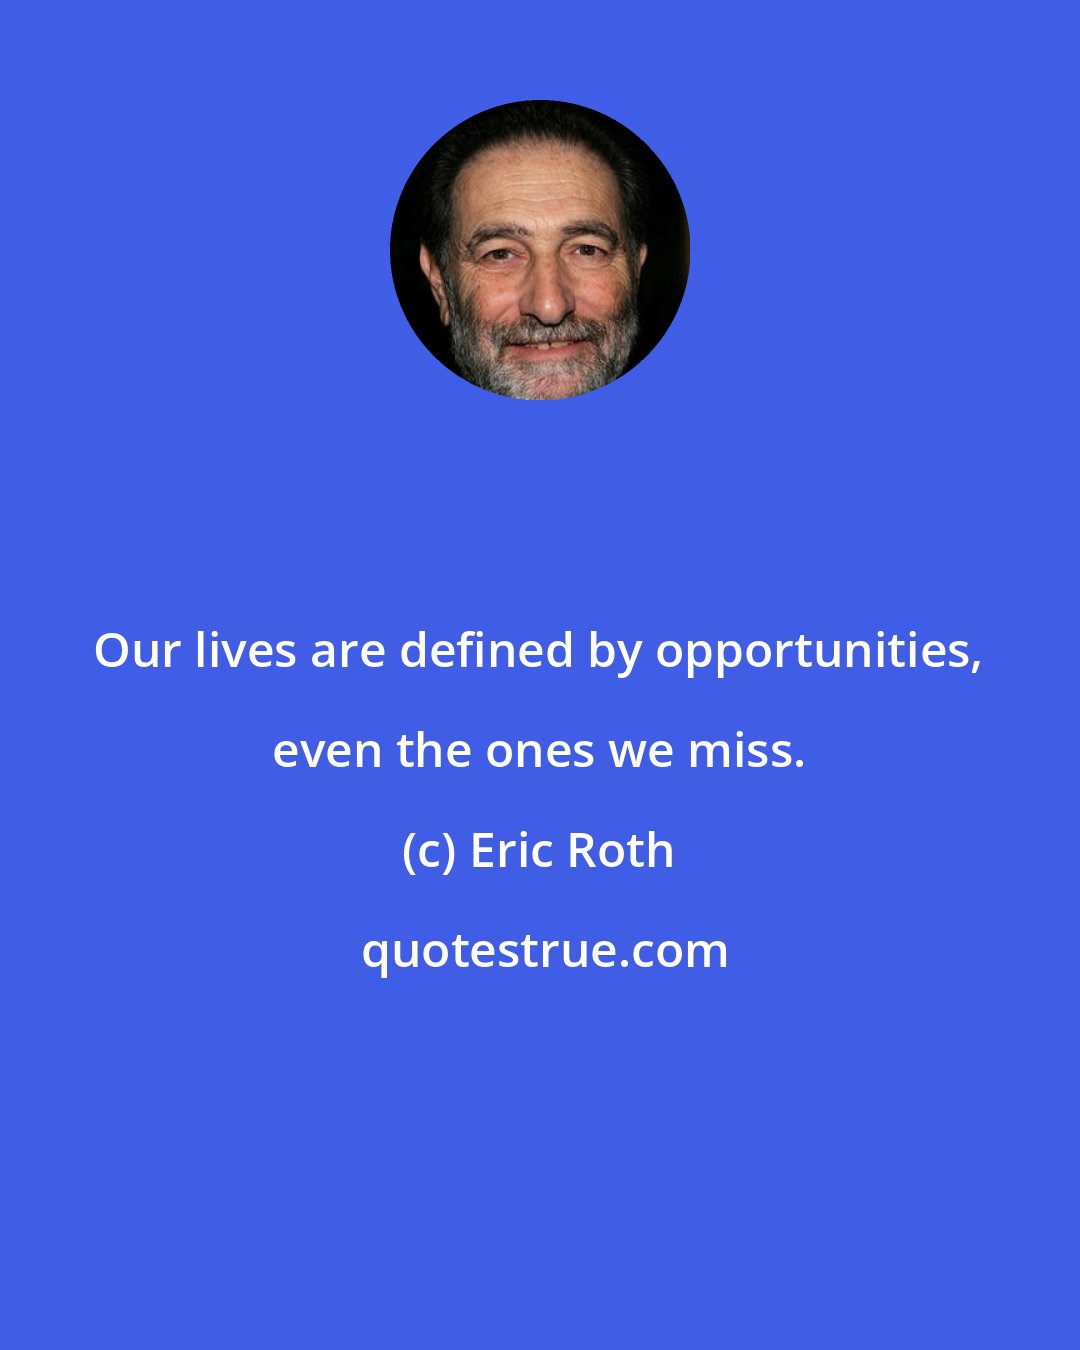 Eric Roth: Our lives are defined by opportunities, even the ones we miss.